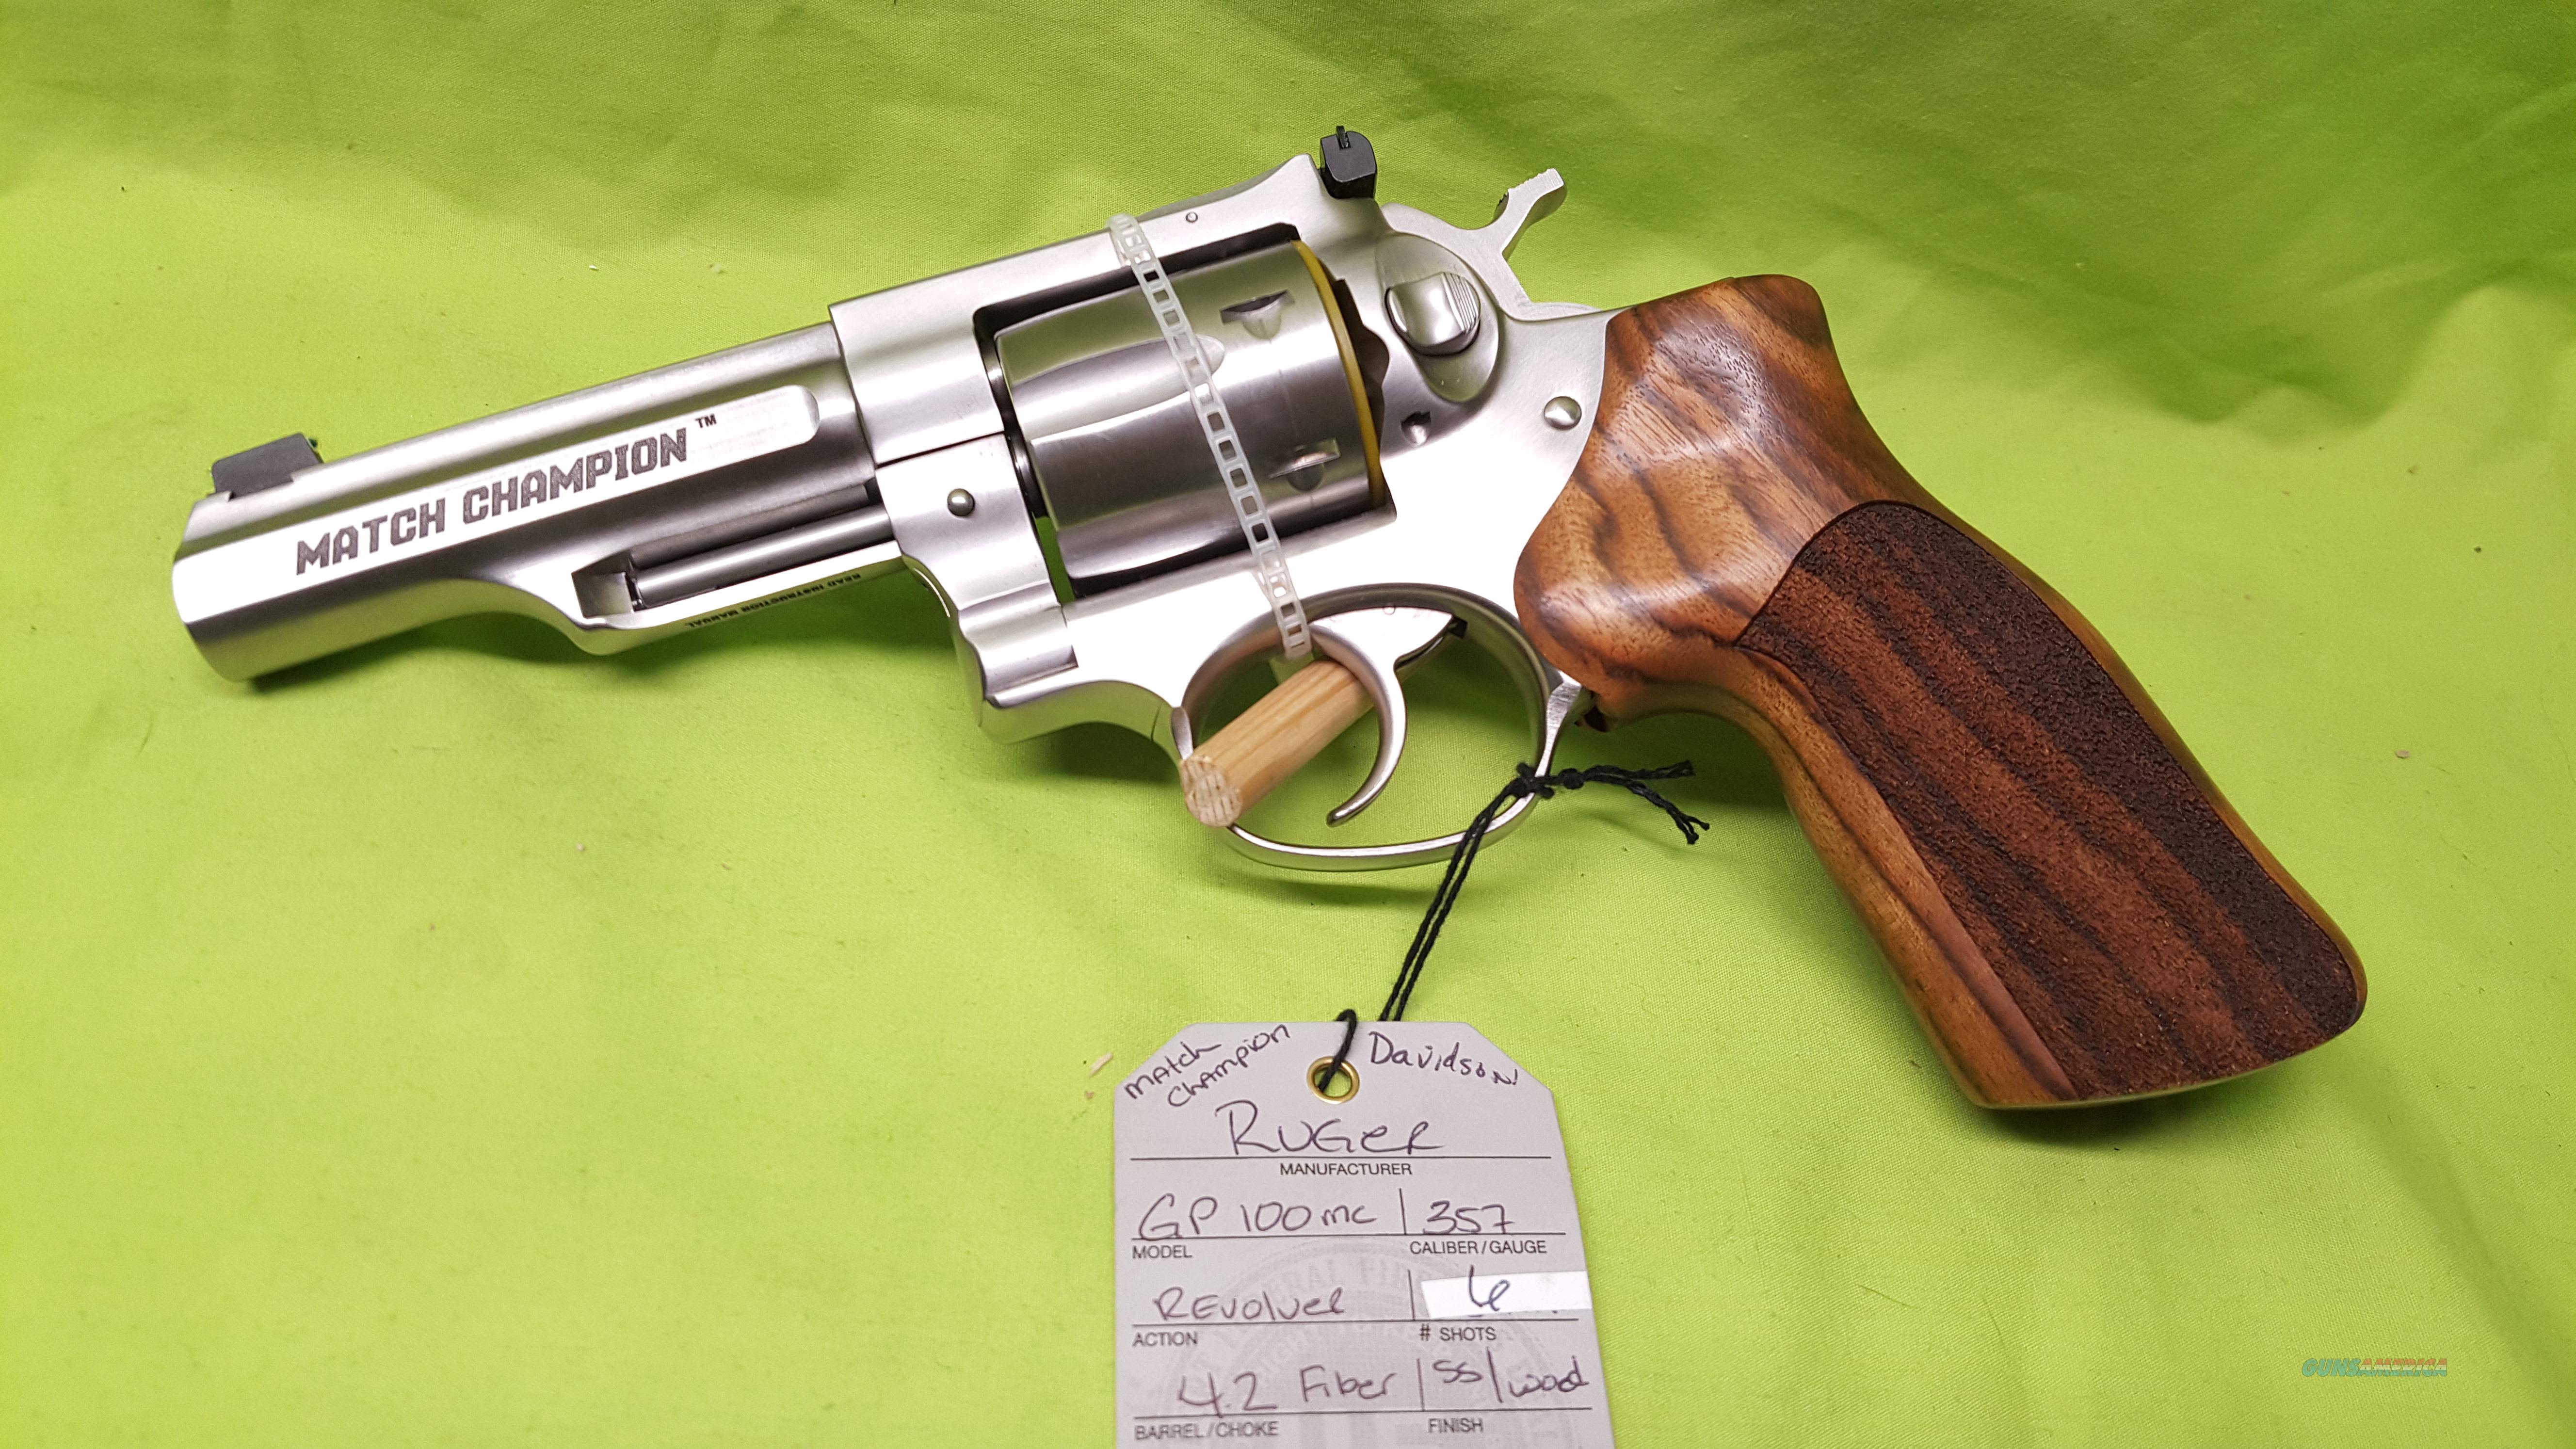 Ruger Gp100 Gp 100 Match Champion M For Sale At 939559582 2301